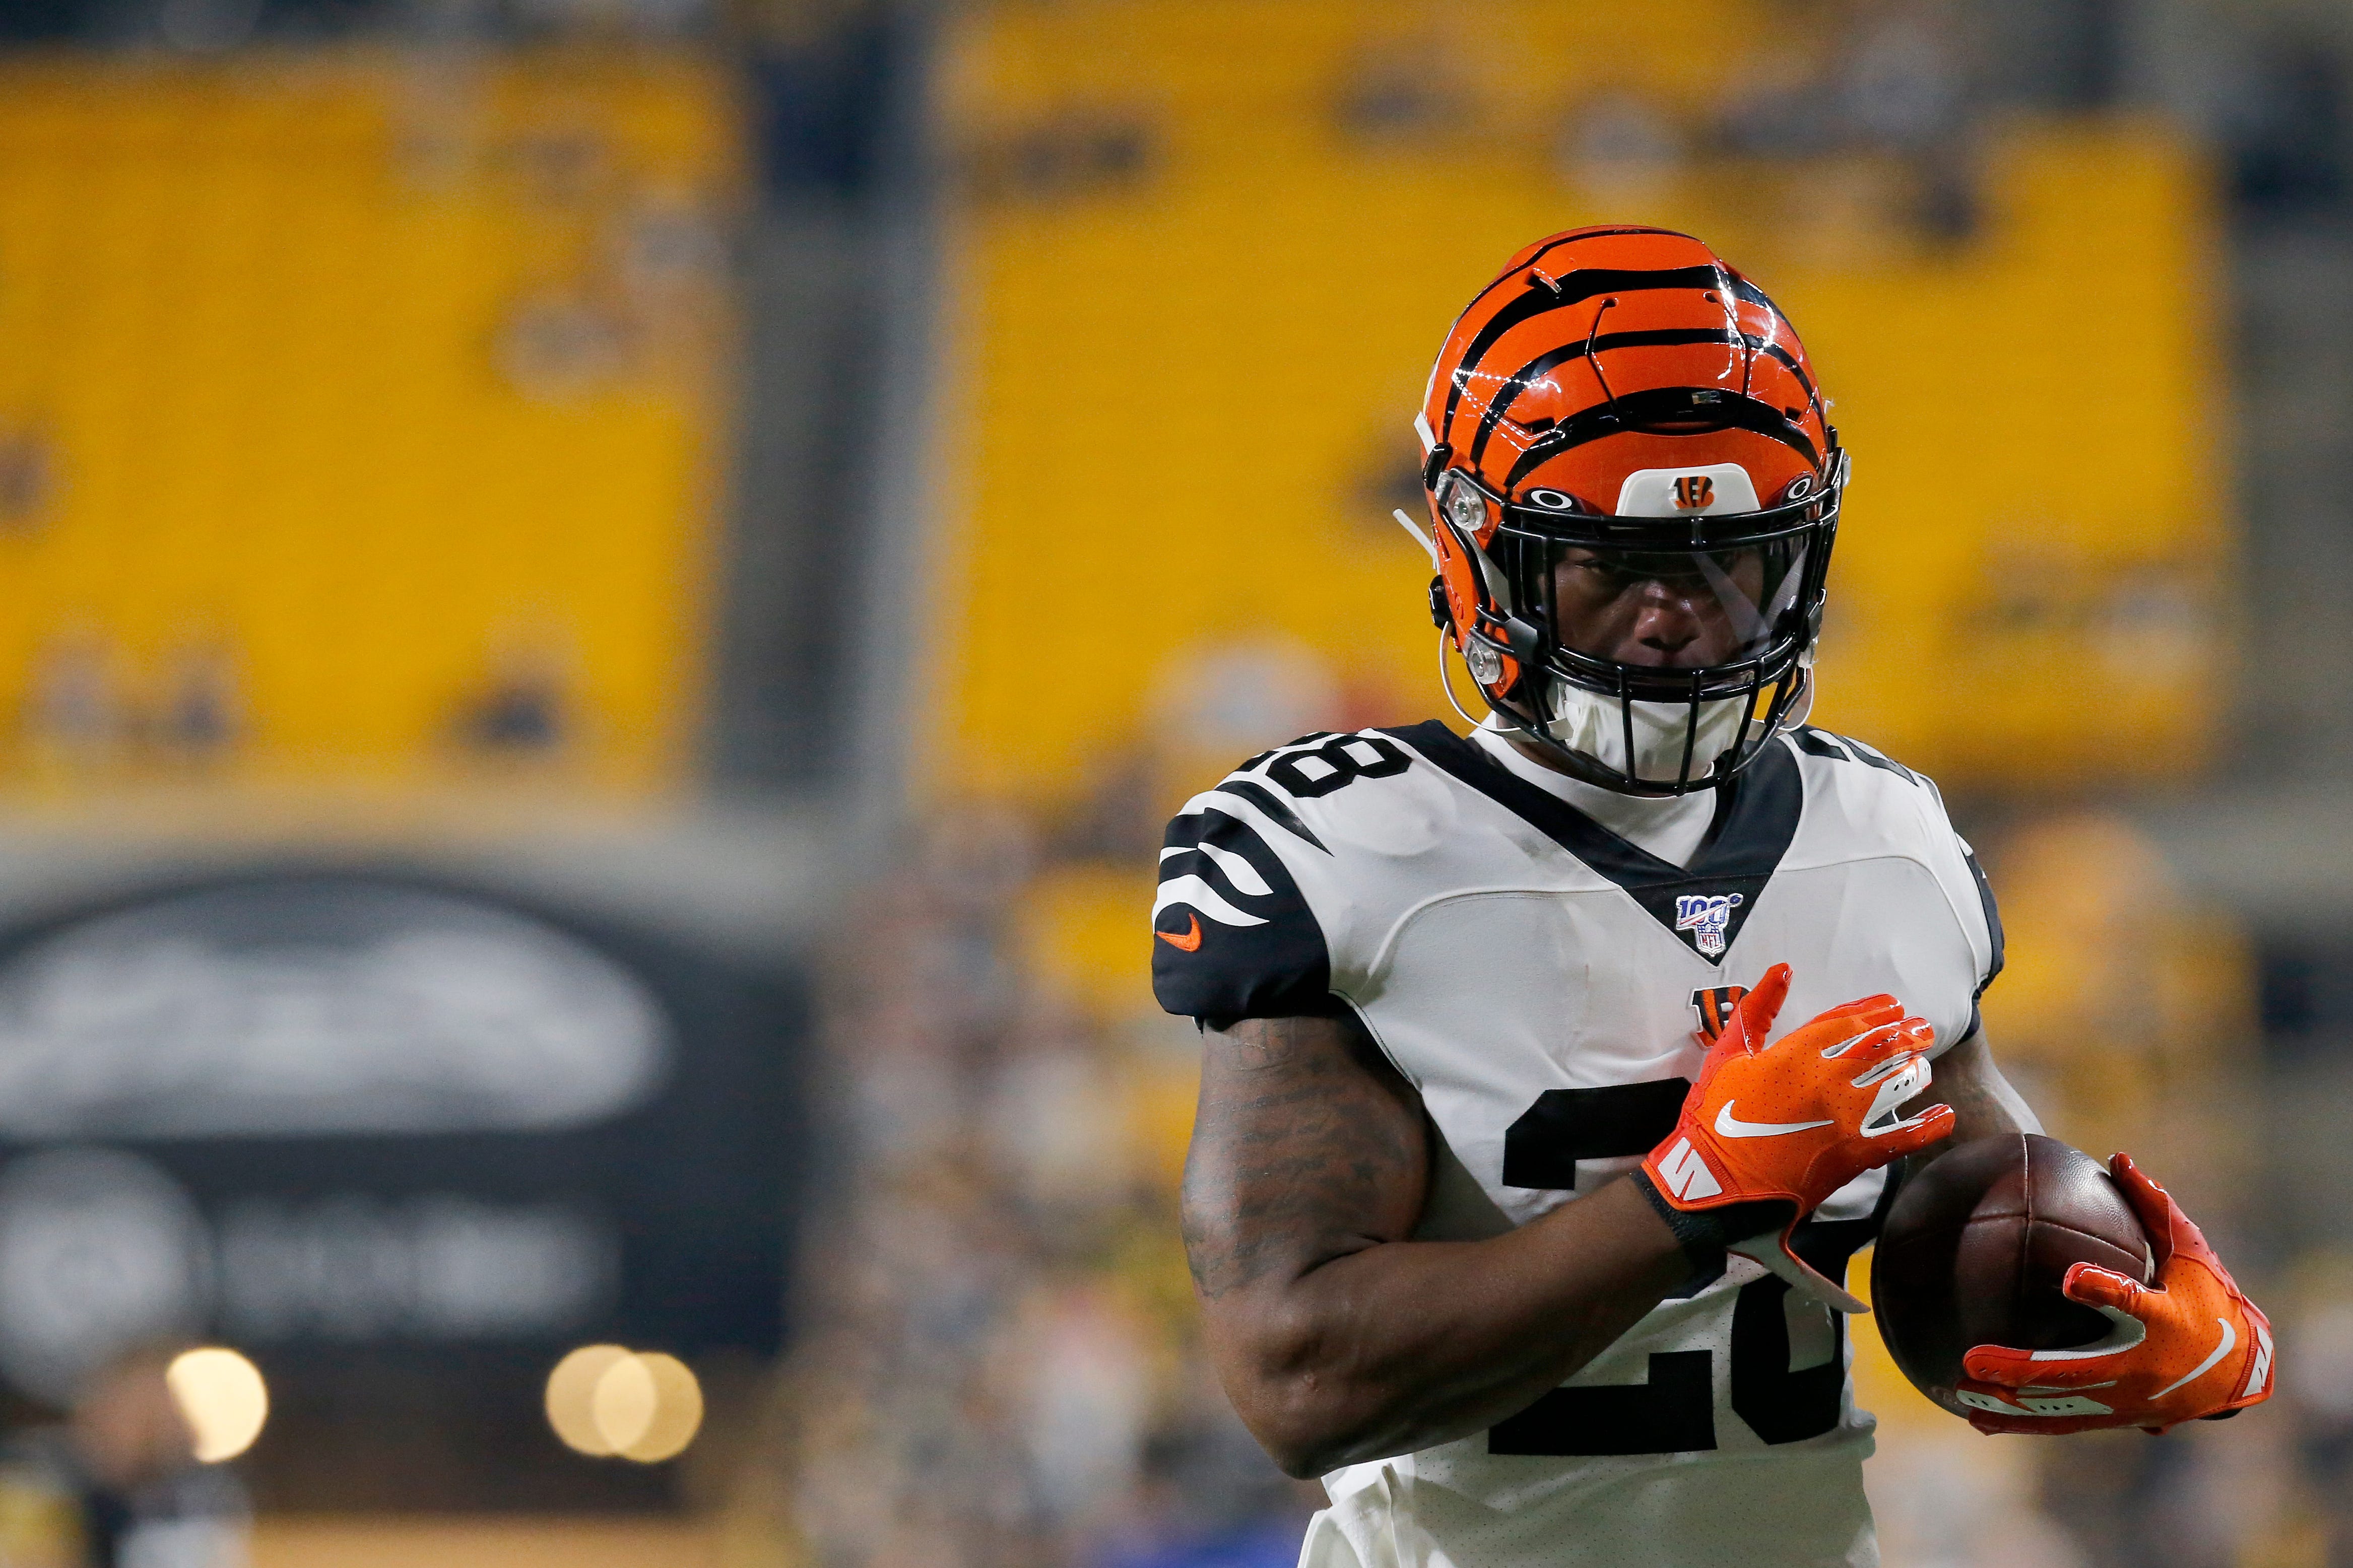 5 thoughts on Bengals news, including A.J. Green, jersey redesigns